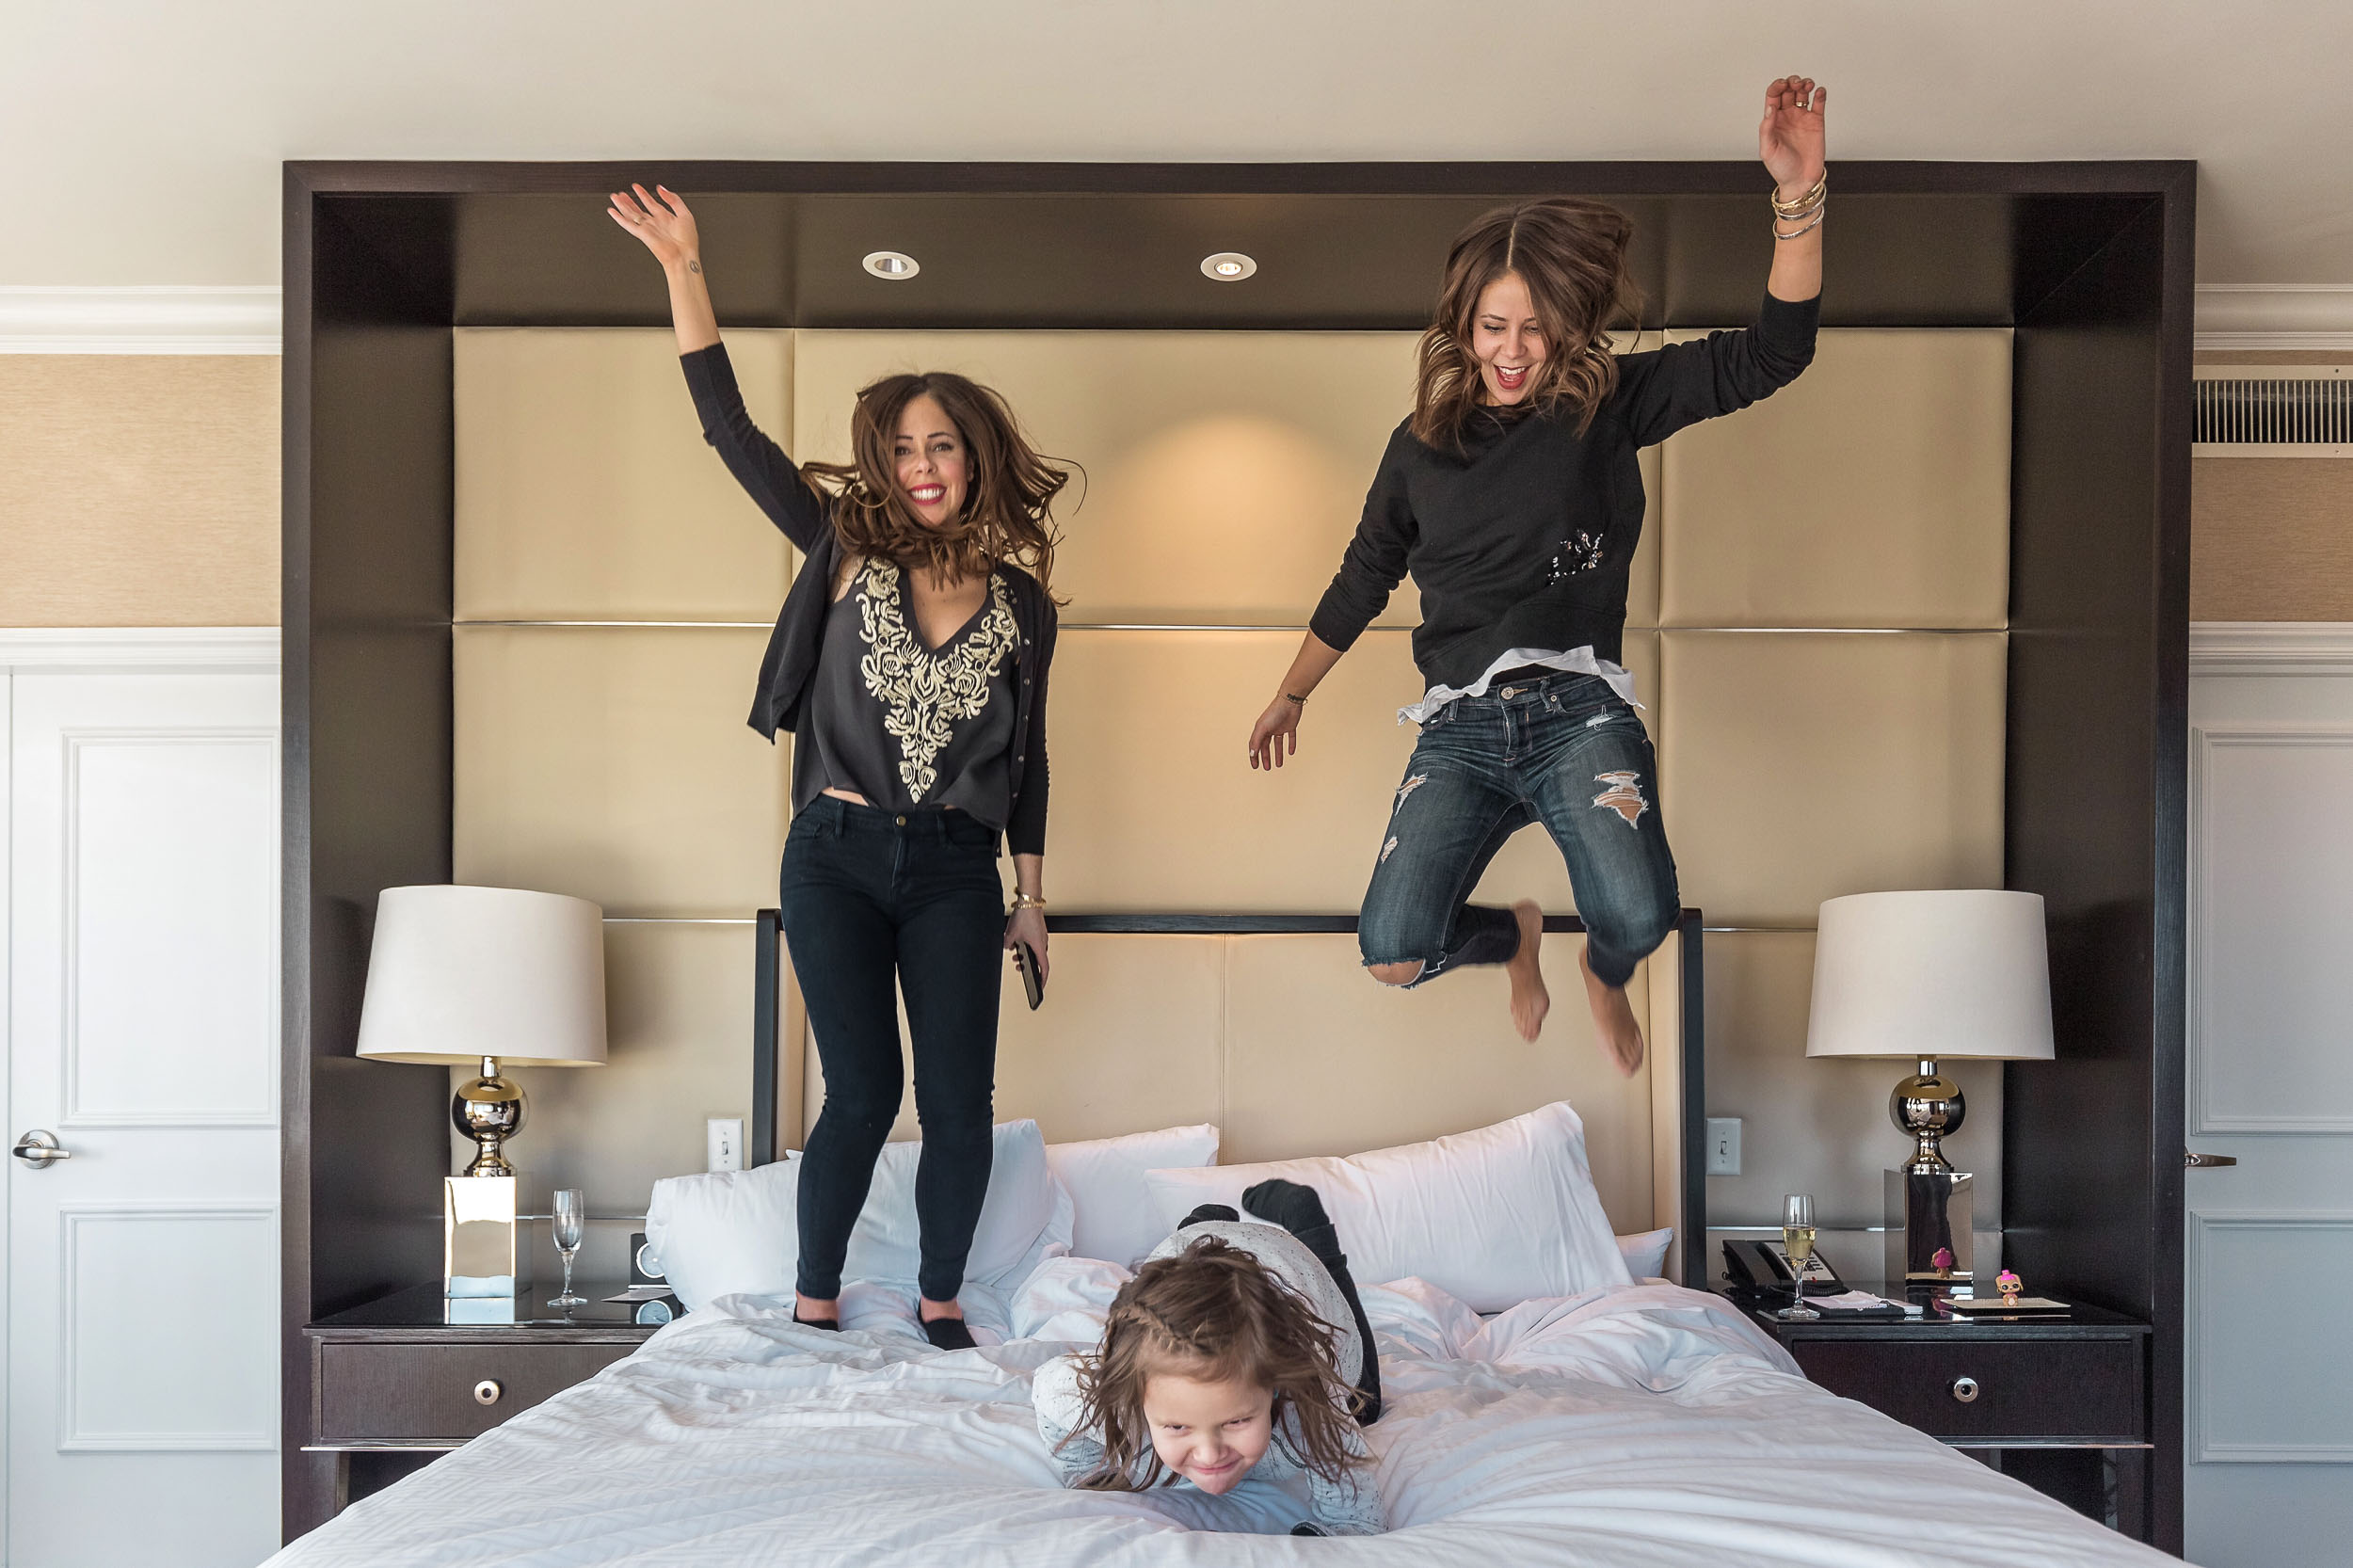 Jumping for joy in the Presidential/Sparkle Suite at The Fairmont San Francisco